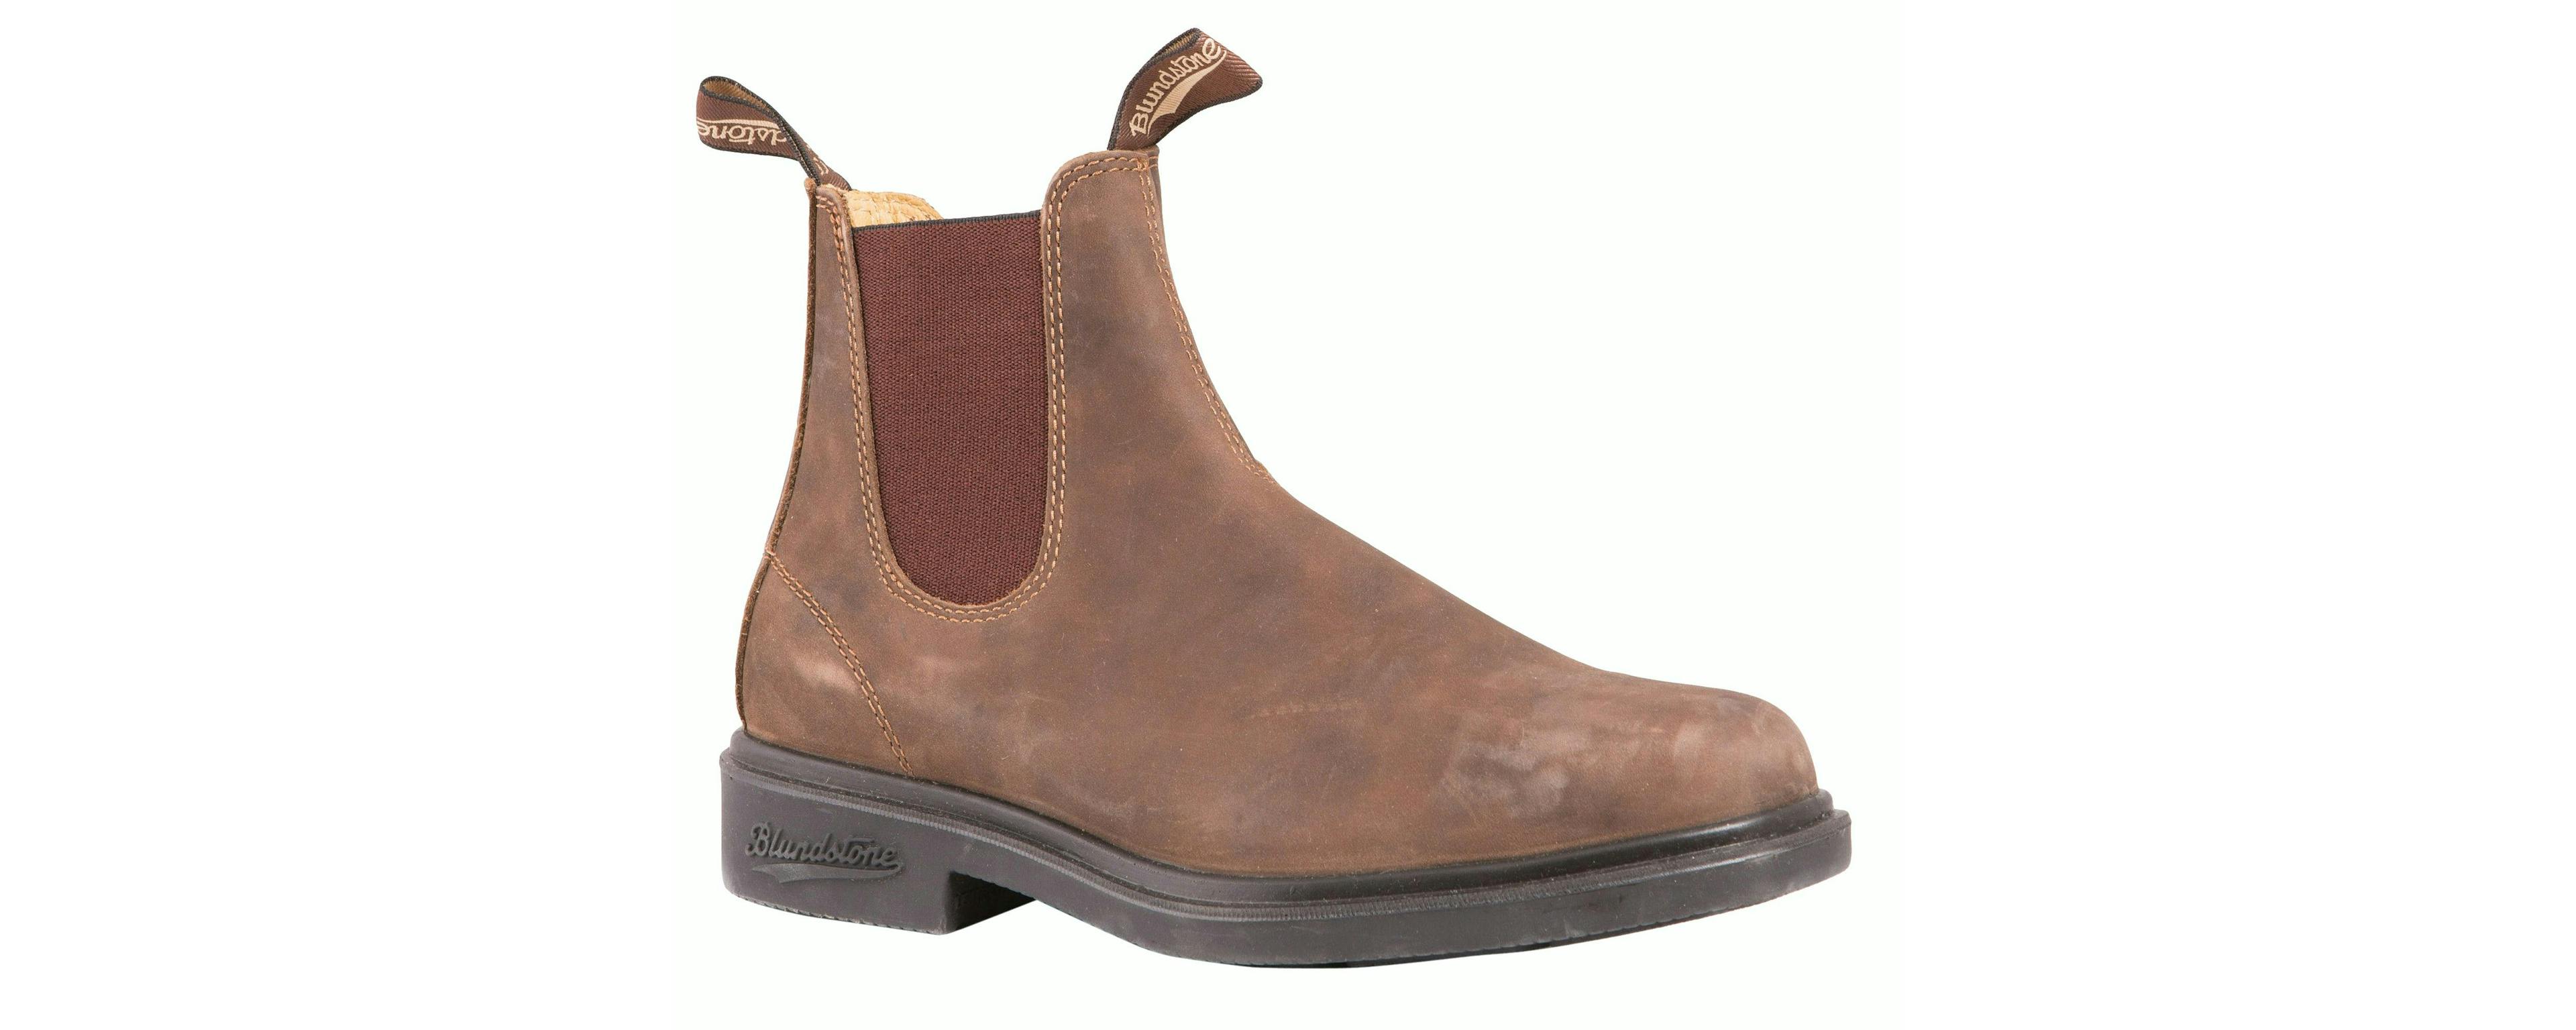 Blundstone boot in brown